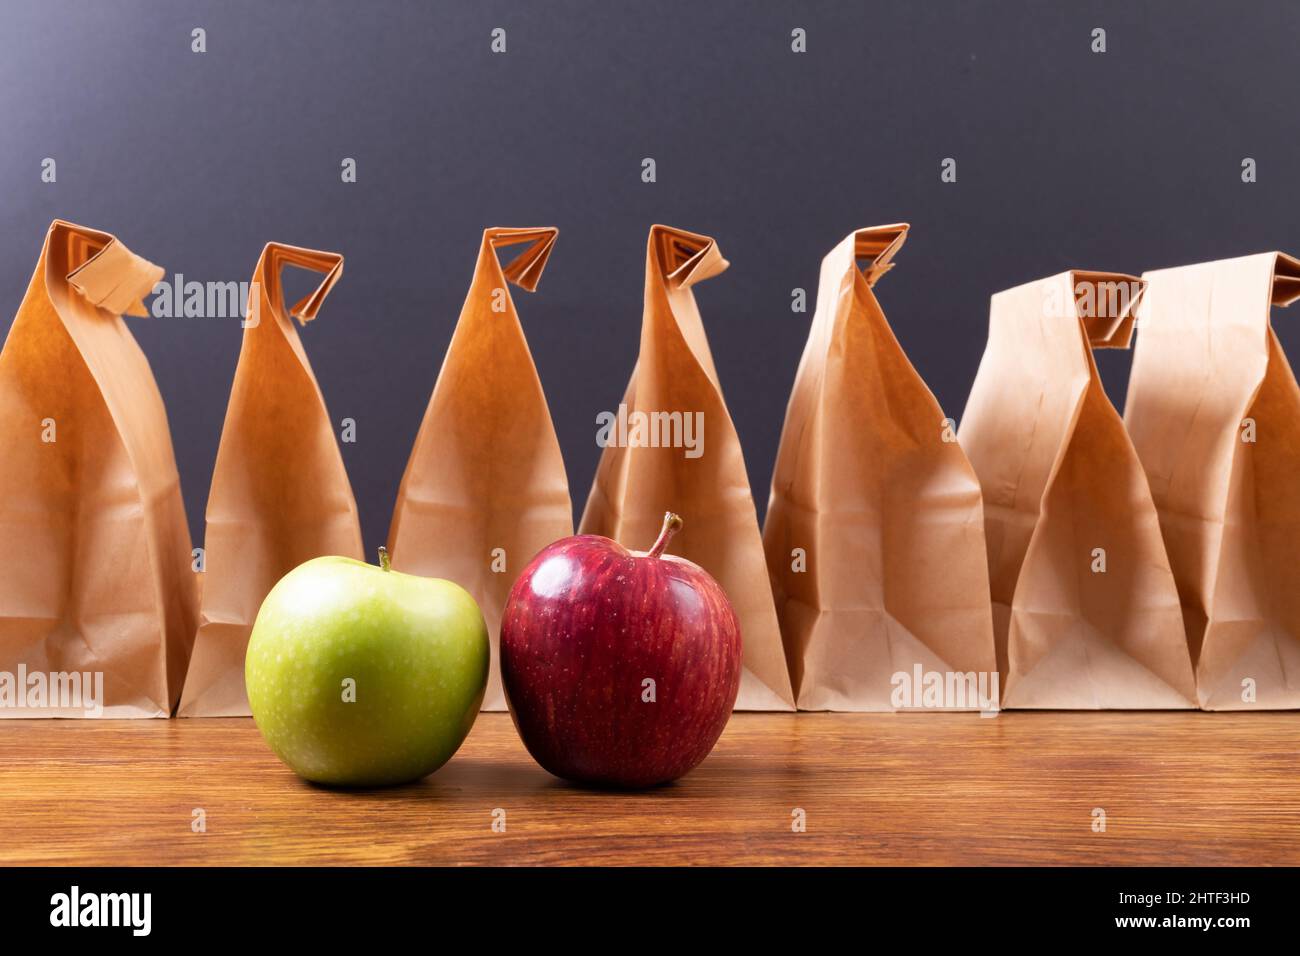 Granny smith apple and apple by paper lunch bags arranged on table against black background Stock Photo